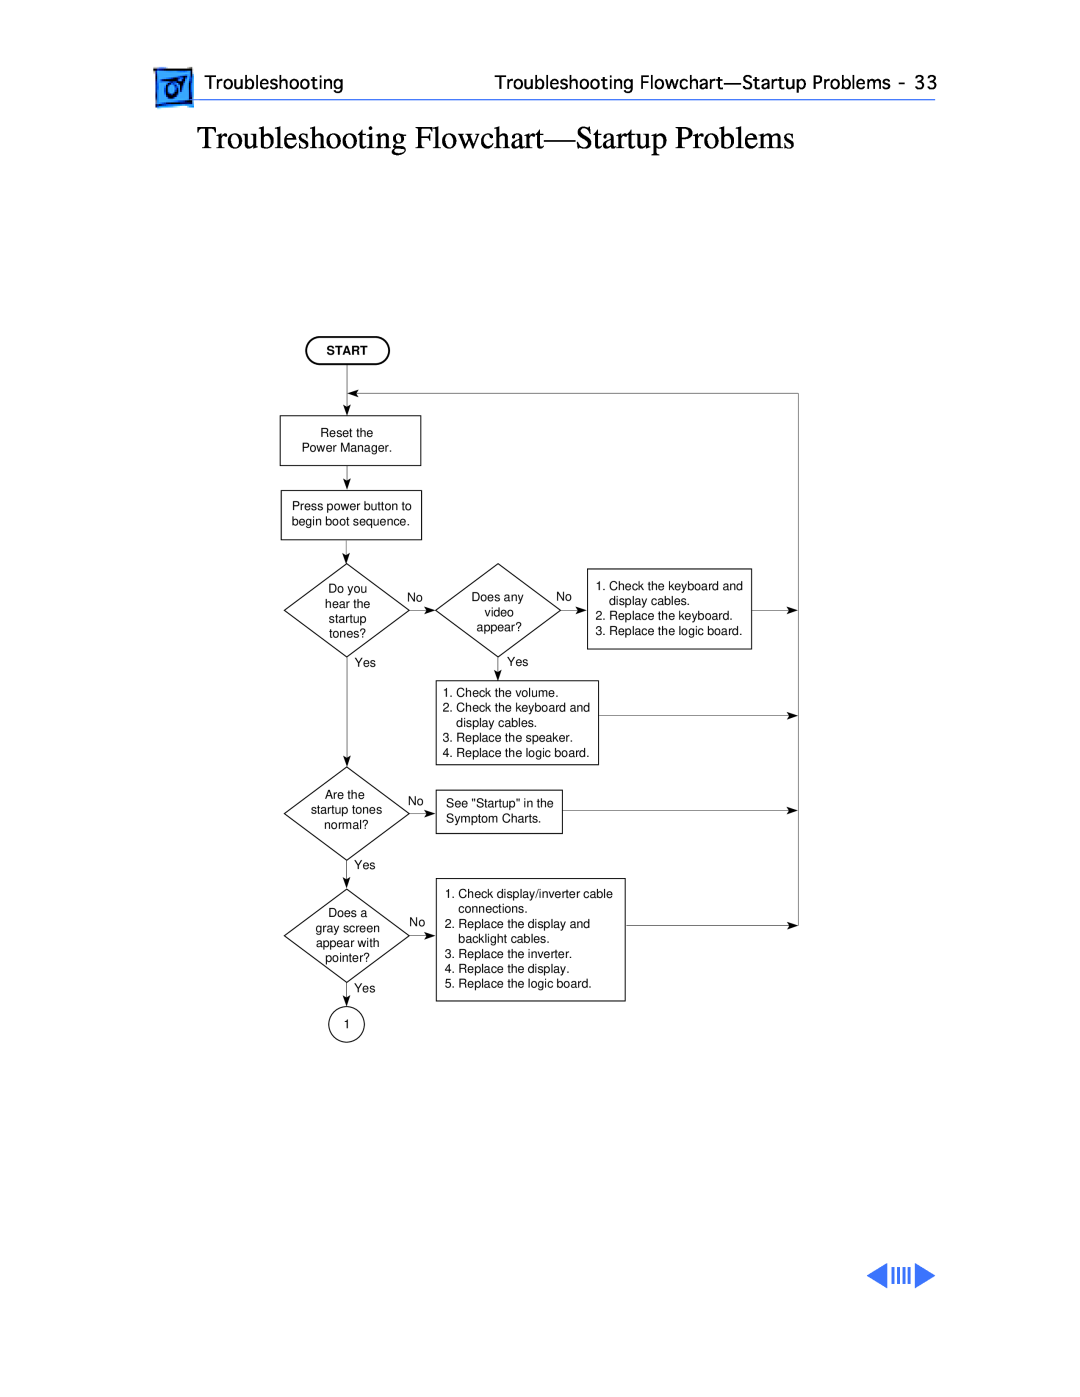 Apple 3400C/200, G3 manual Troubleshooting Flowchart-Startup Problems 